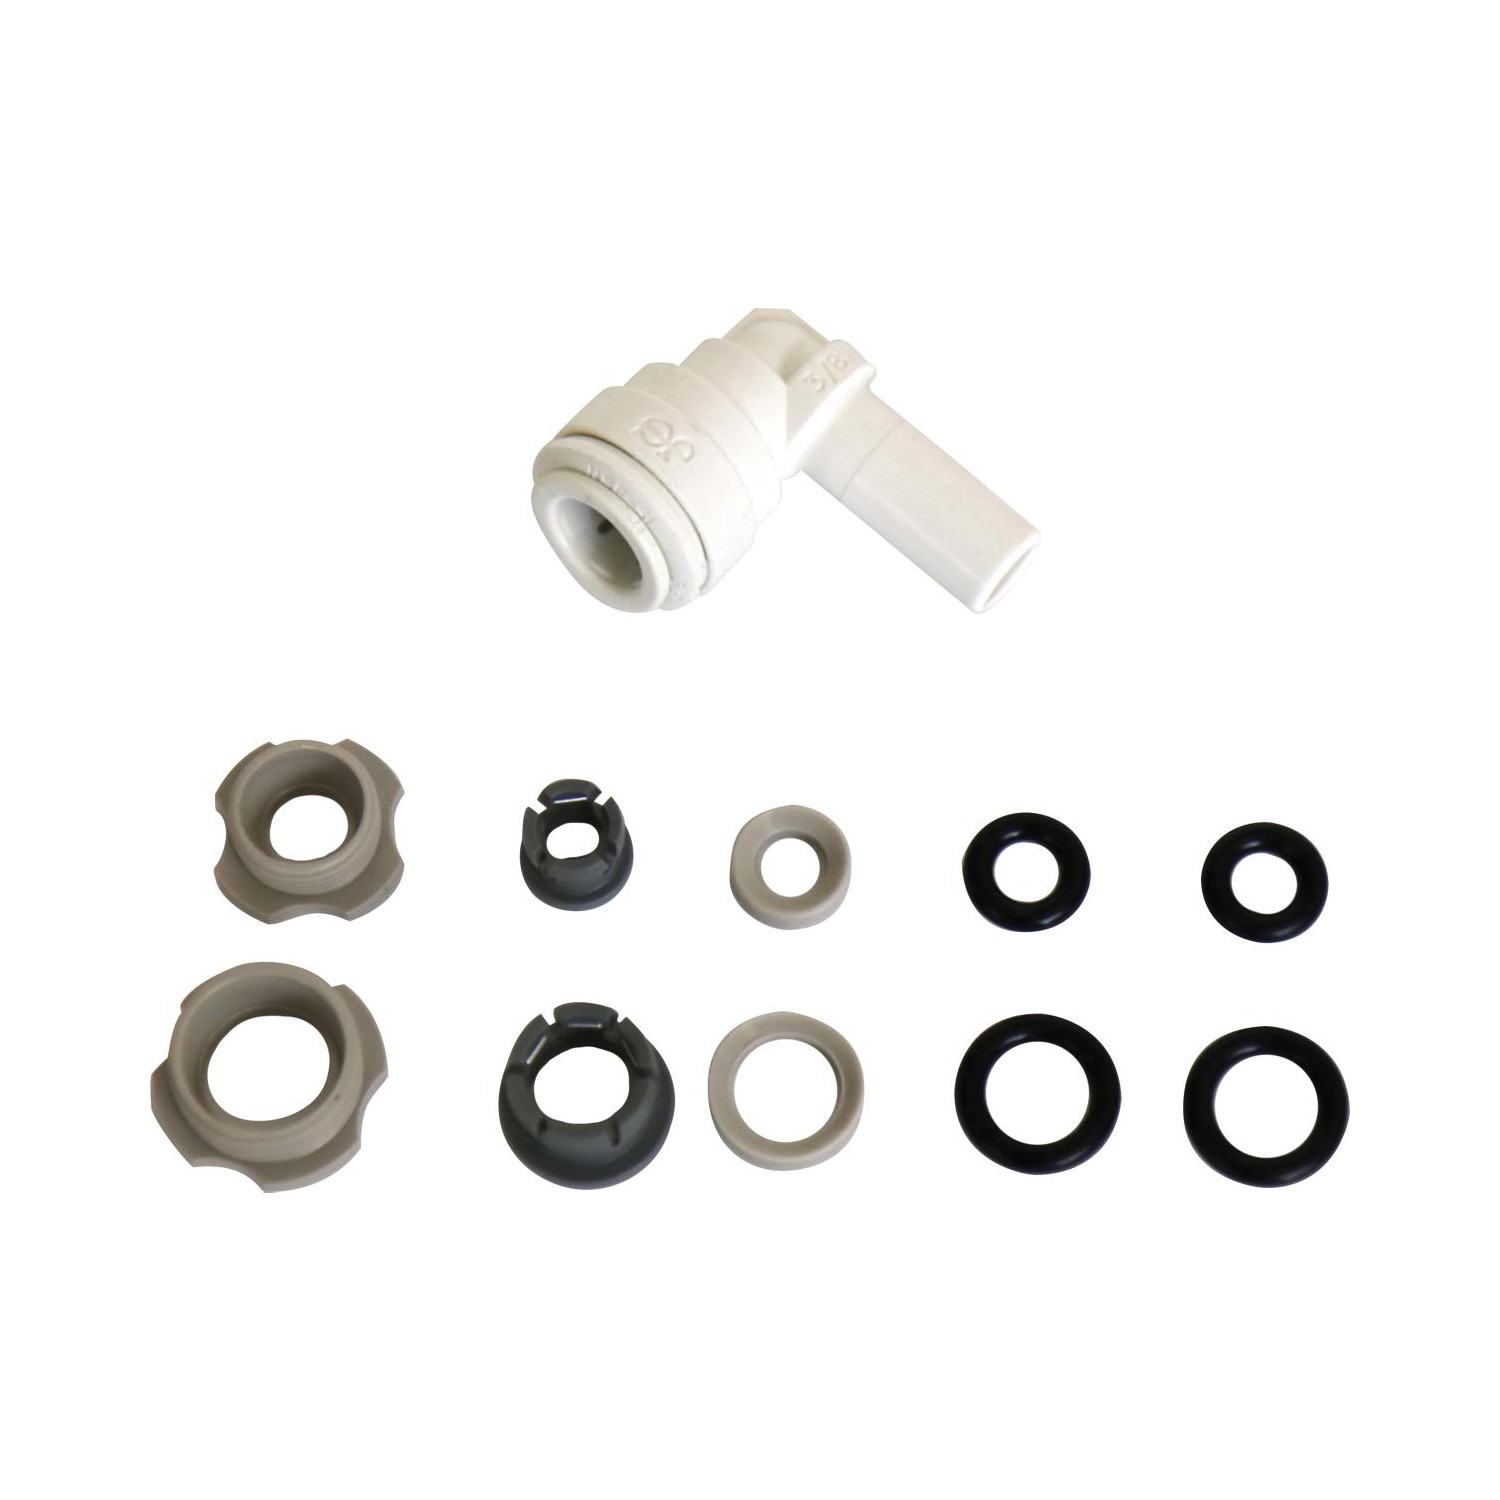 98926C LKC/HT Replacement Filter Head Fitting Kit